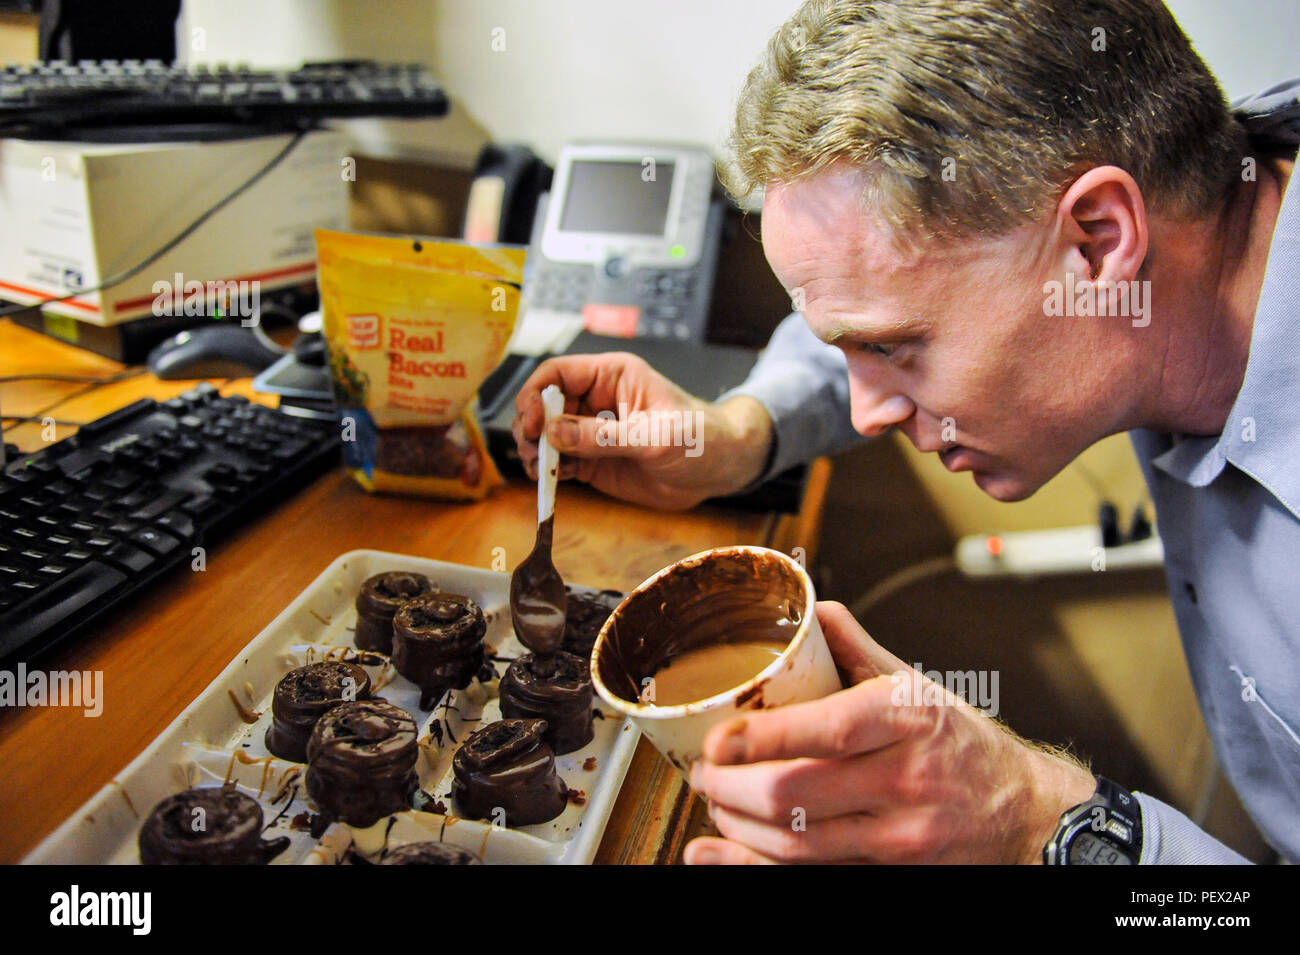 Dan Johnson, 455th Expeditionary Mission Support Group contract augmentation program manager and treat maker, makes a batch of 'Dead Elvis' at Bagram Air Field, Afghanistan, on Feb. 16, 2016. The 'Dead Elvis' is a deployed confection created using peanut butter Oreos, bacon, and chocolate. (U.S. Air Force photo by Tech. Sgt. Nicholas Rau) Stock Photo